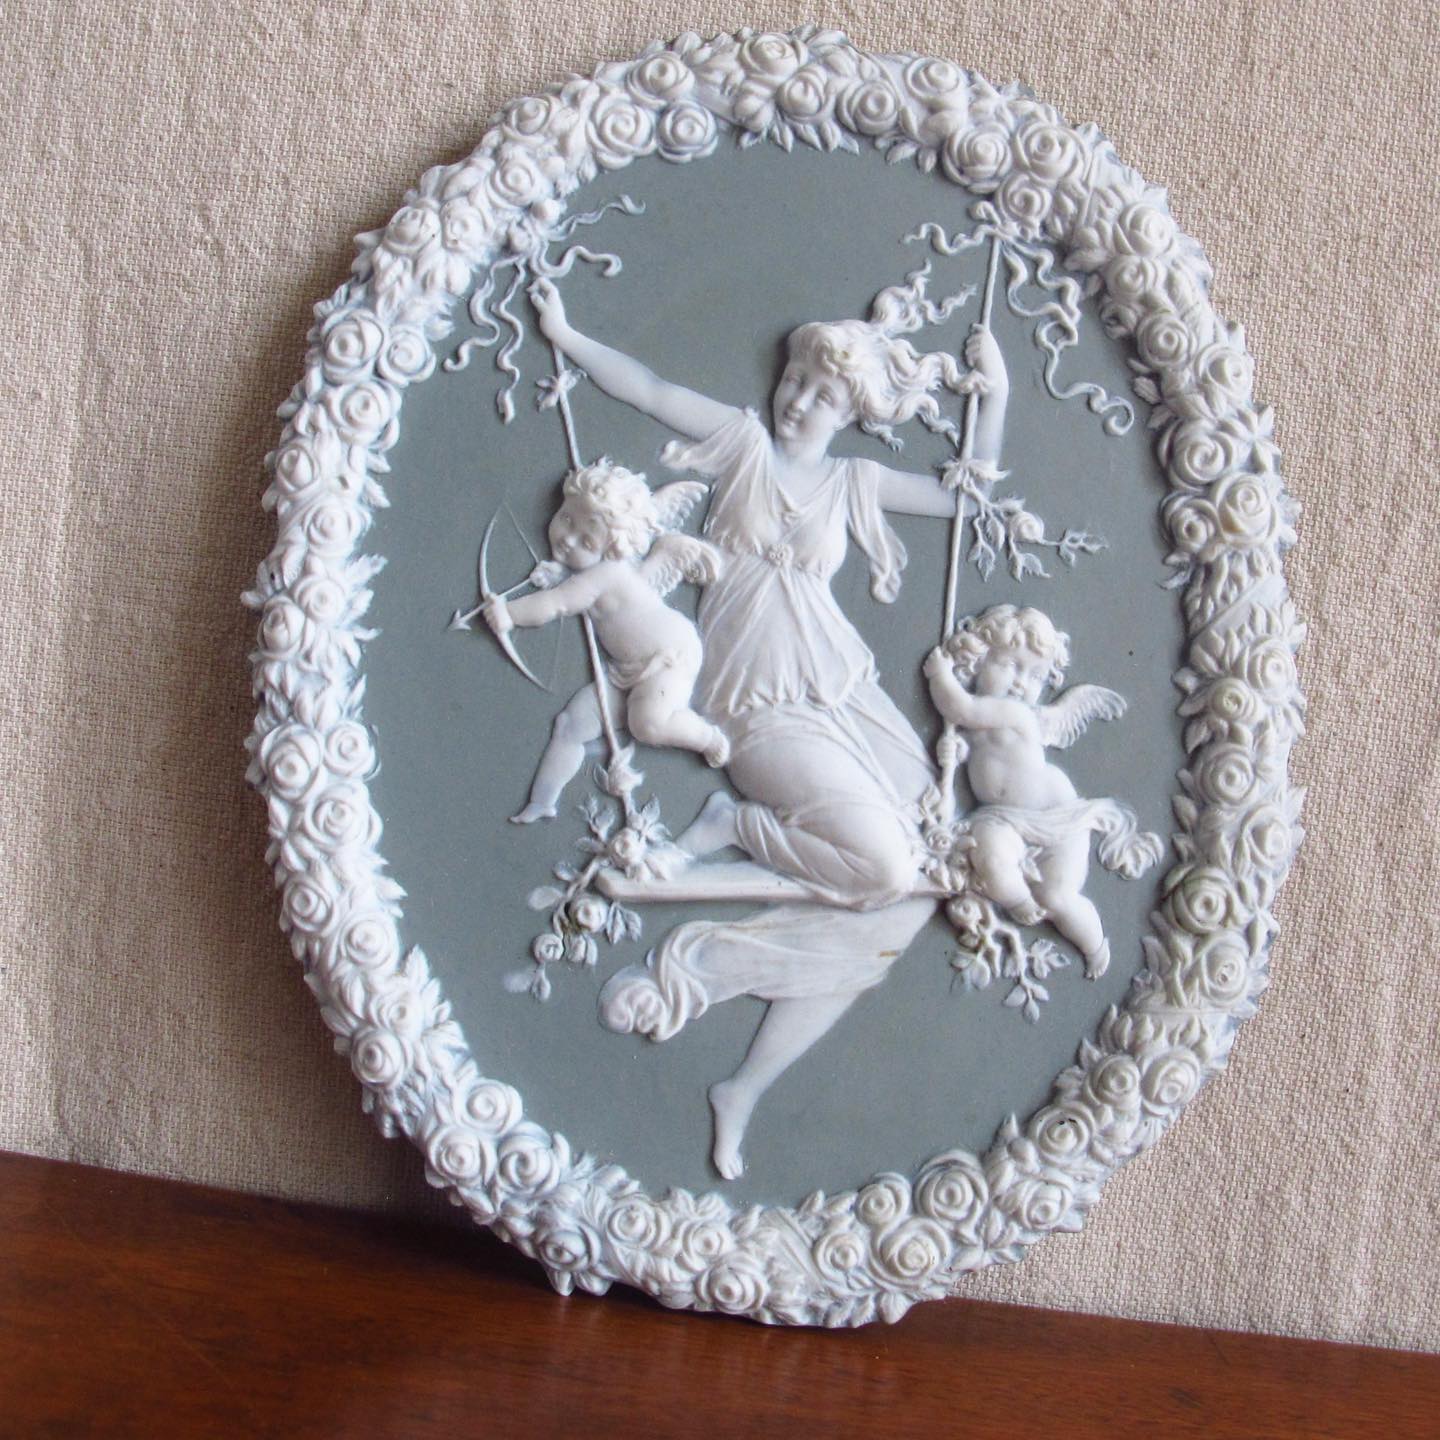 Victorian jasperware bisque relief with maiden and putti / cupid playing on a swing, in the manner of Wedgwood, c. 1890